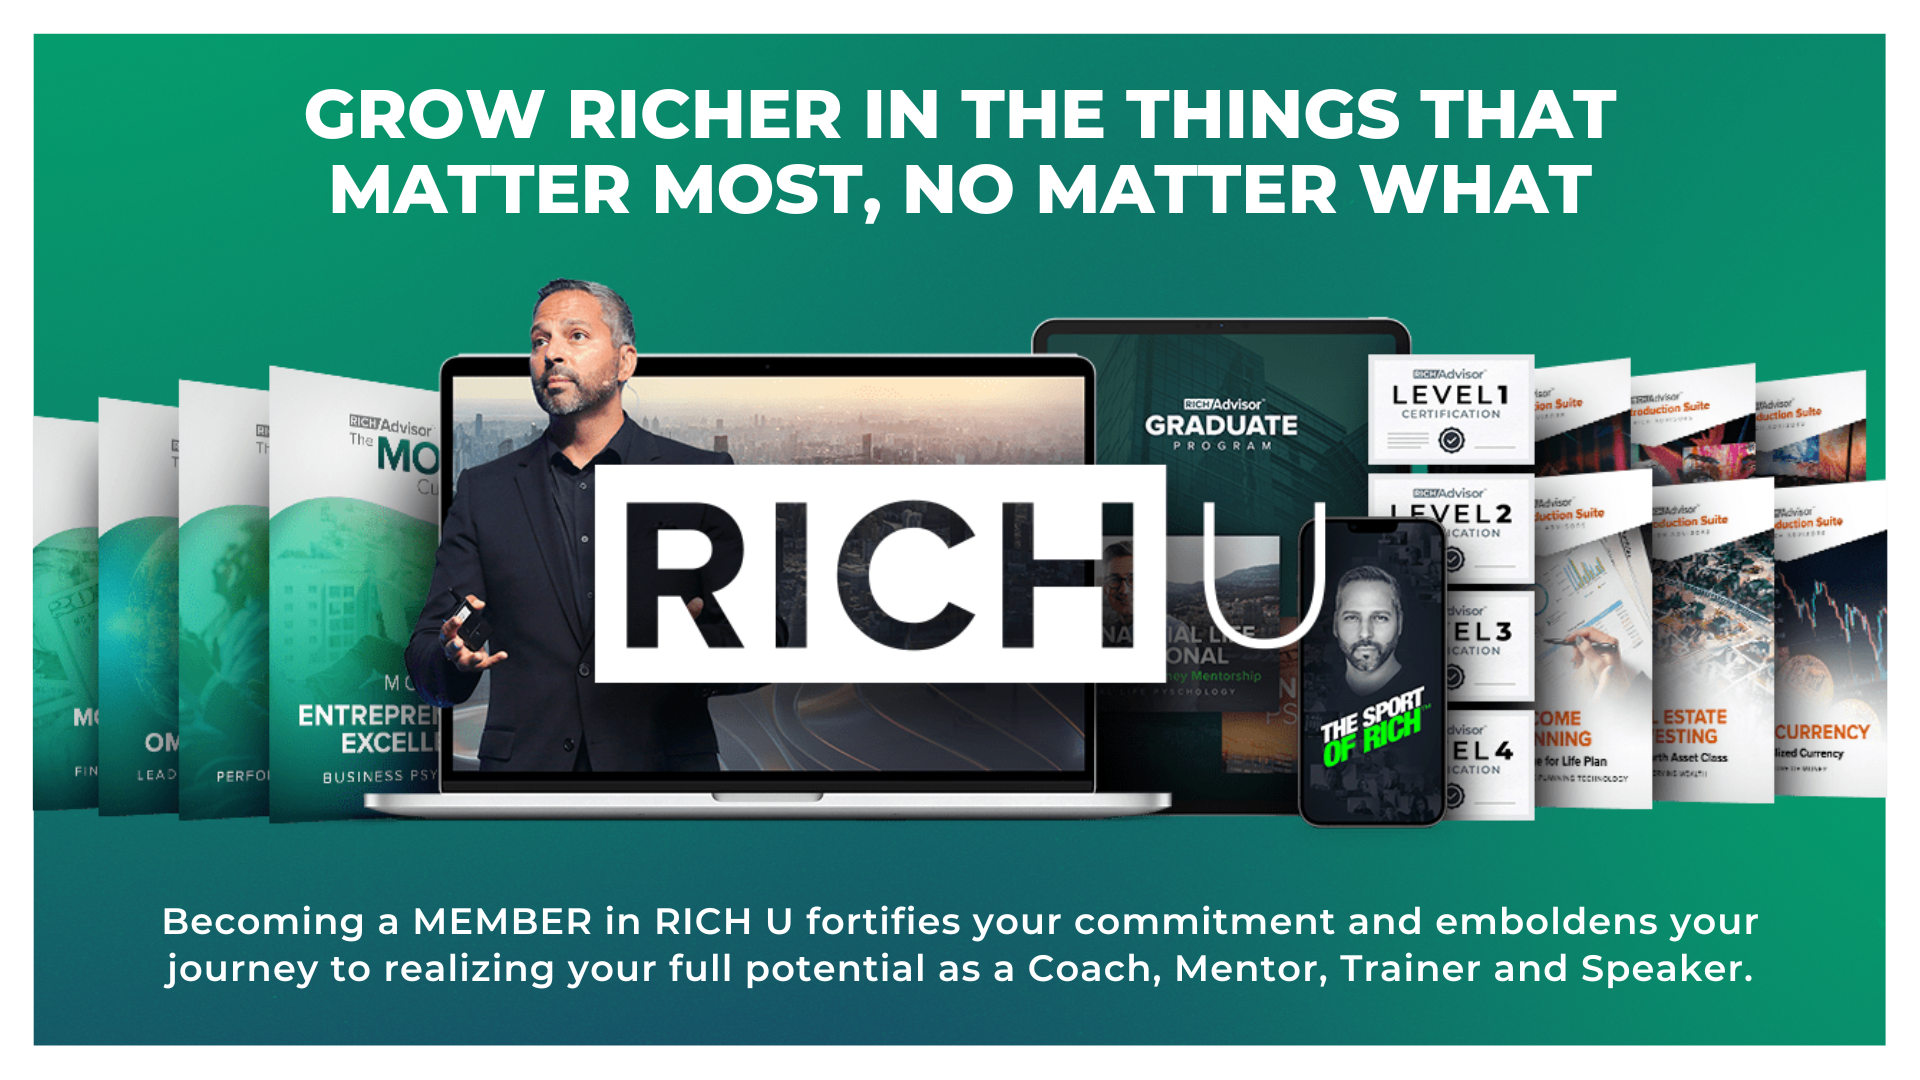 Join as a RICH U MEMBER – Save $200 when you commit for a year